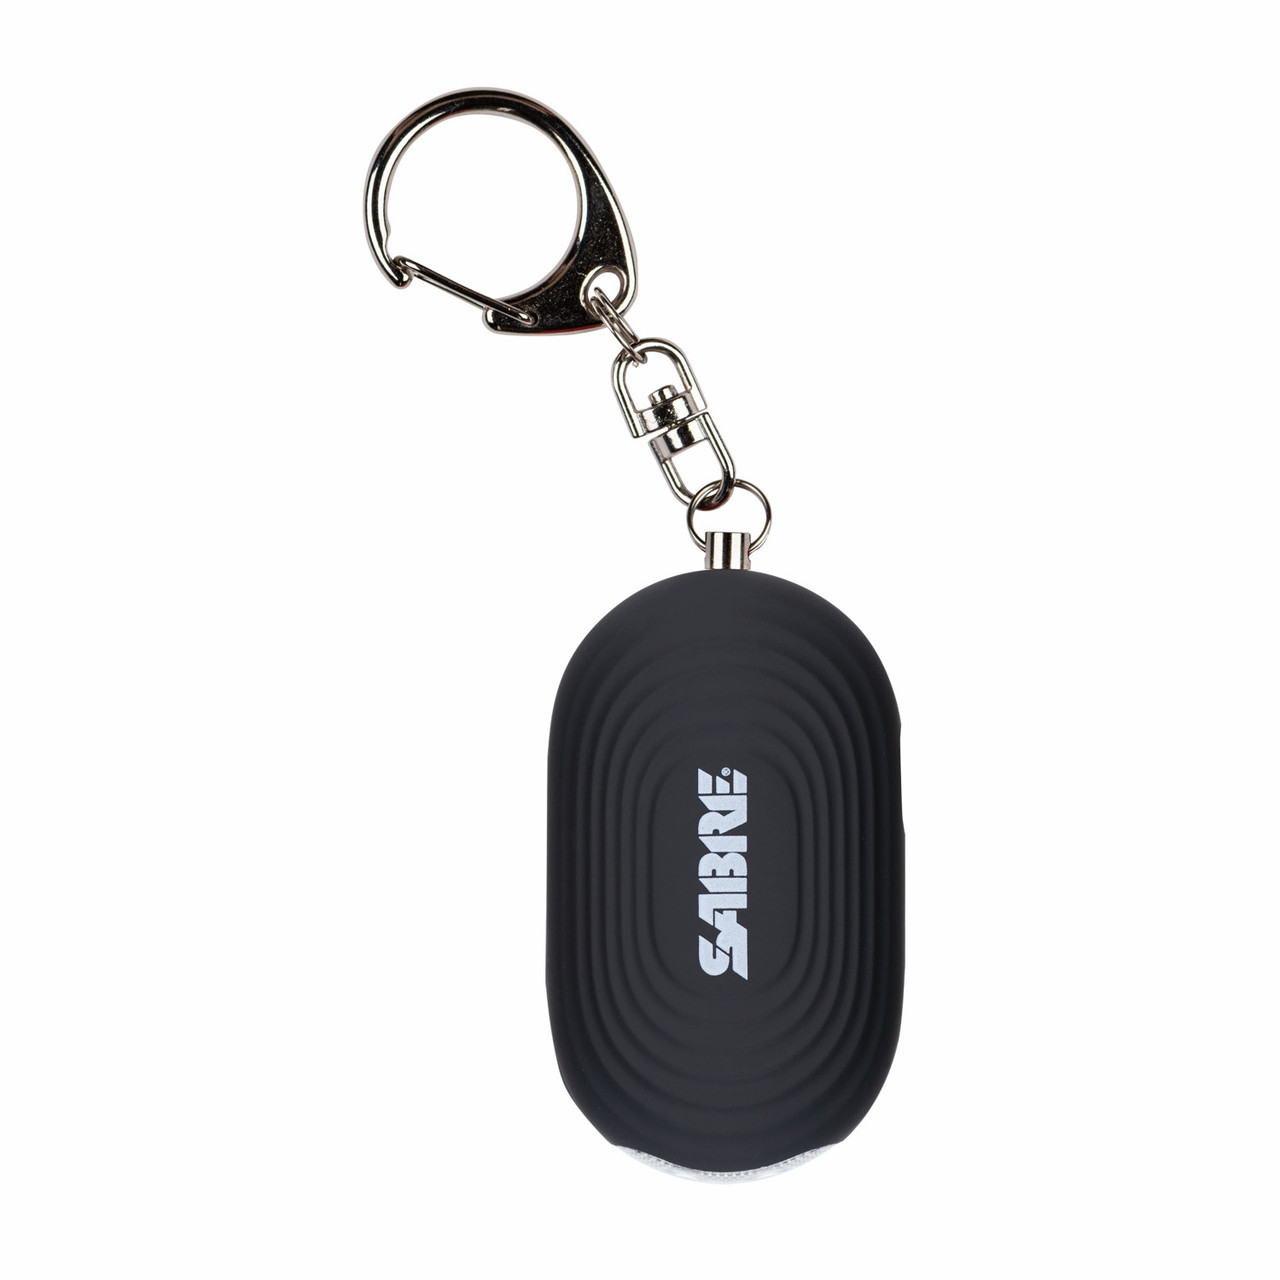 Personal Self Defense Safety Alarm on Key Ring – 5 | OMG Solutions